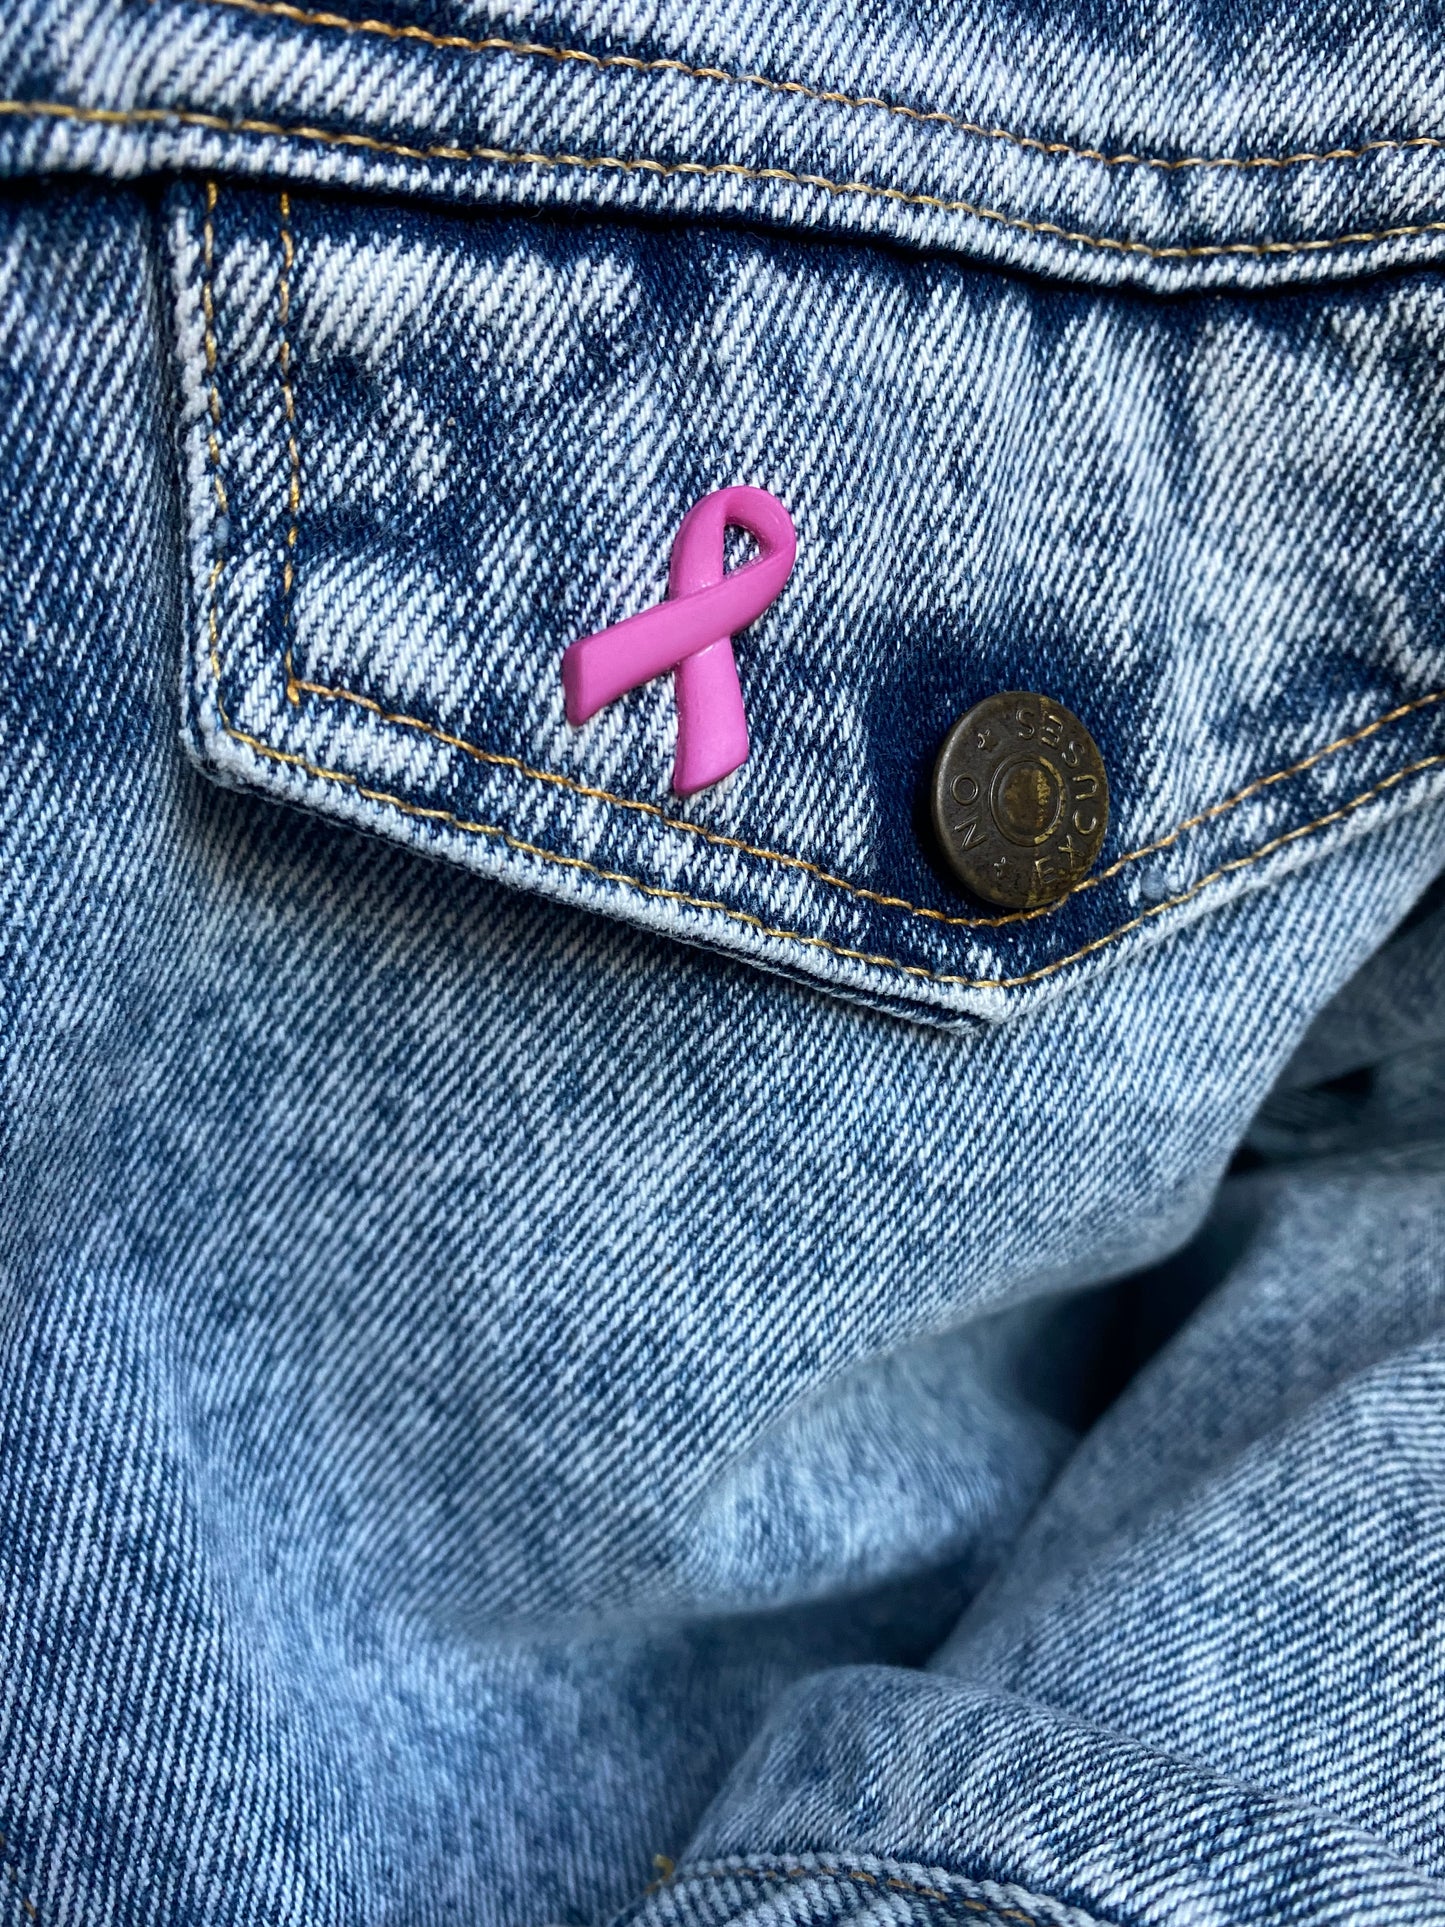 Breast Cancer Awareness Pin Gift